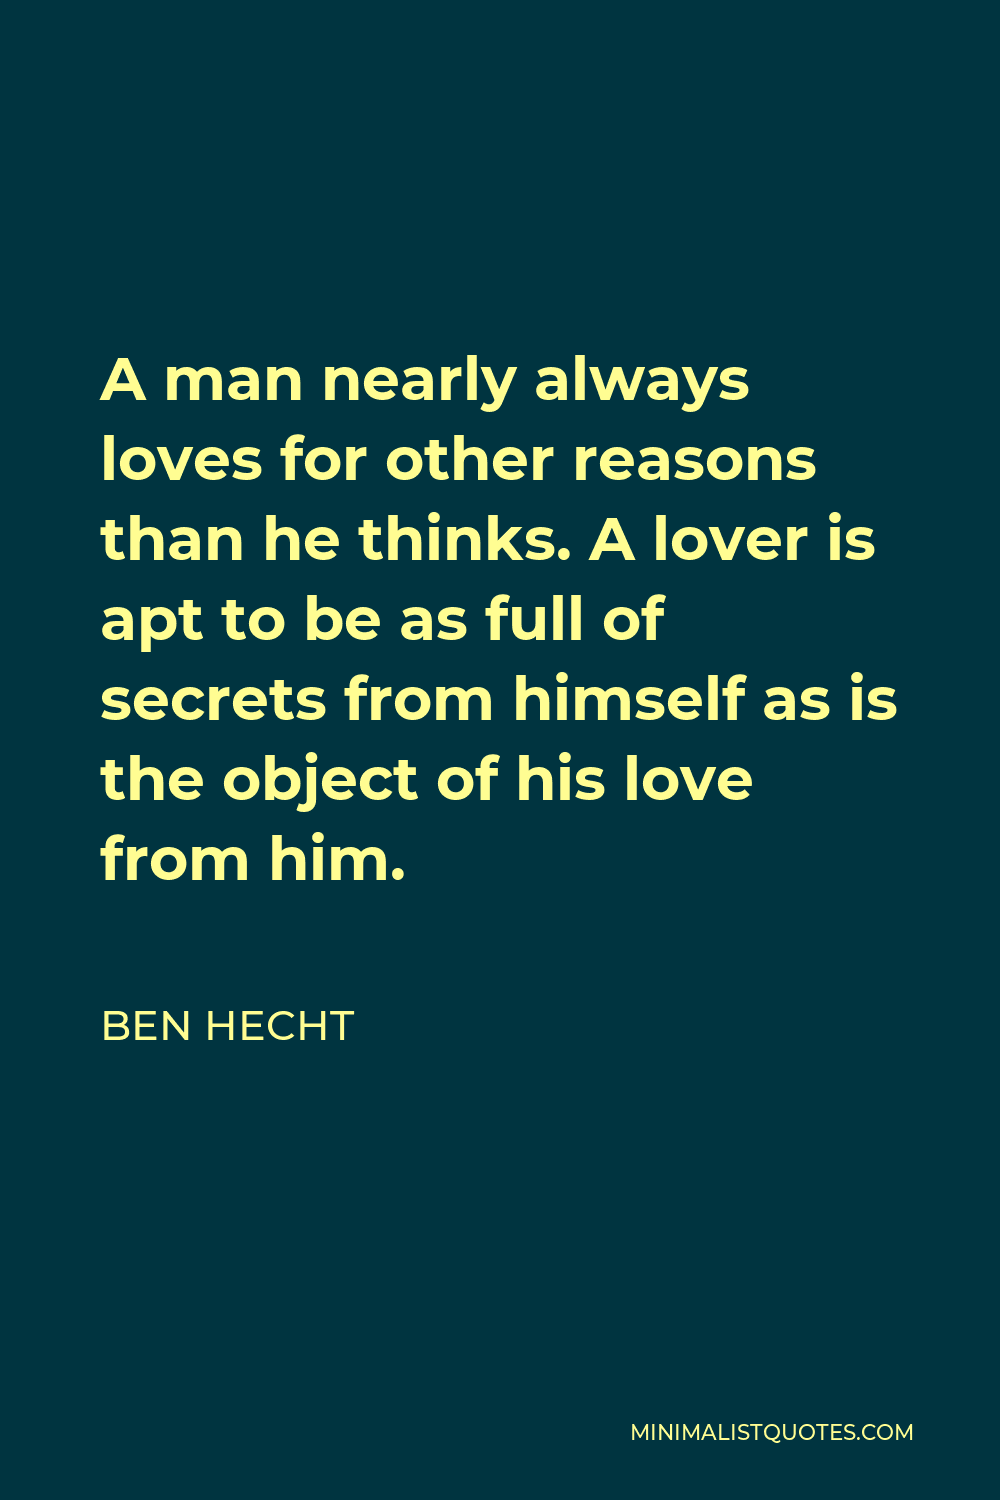 Ben Hecht Quote - A man nearly always loves for other reasons than he thinks. A lover is apt to be as full of secrets from himself as is the object of his love from him.